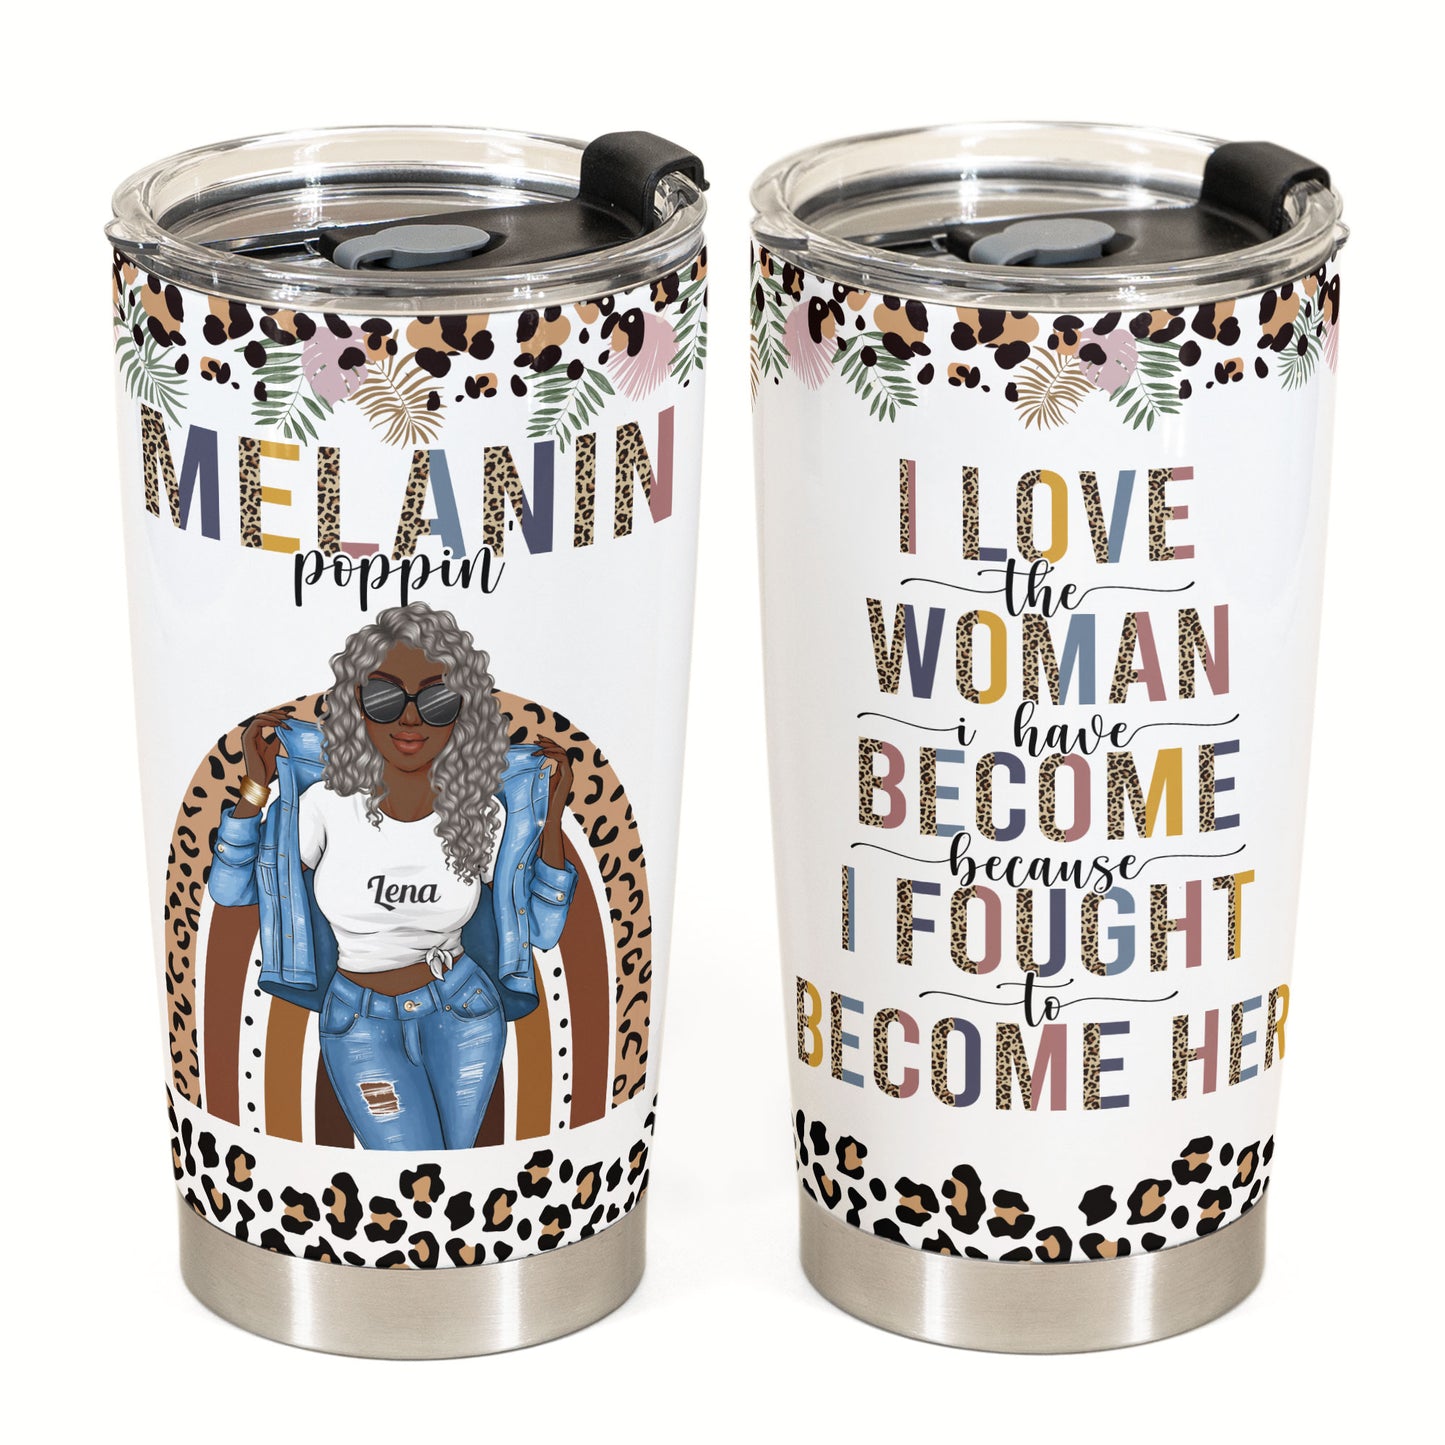 Melanin Poppin' I Love The Woman I Have Become - Personalized Tumbler Cup - Birthday Gift For Her, Afro Girl, Black Lady, Melanin, Black Woman